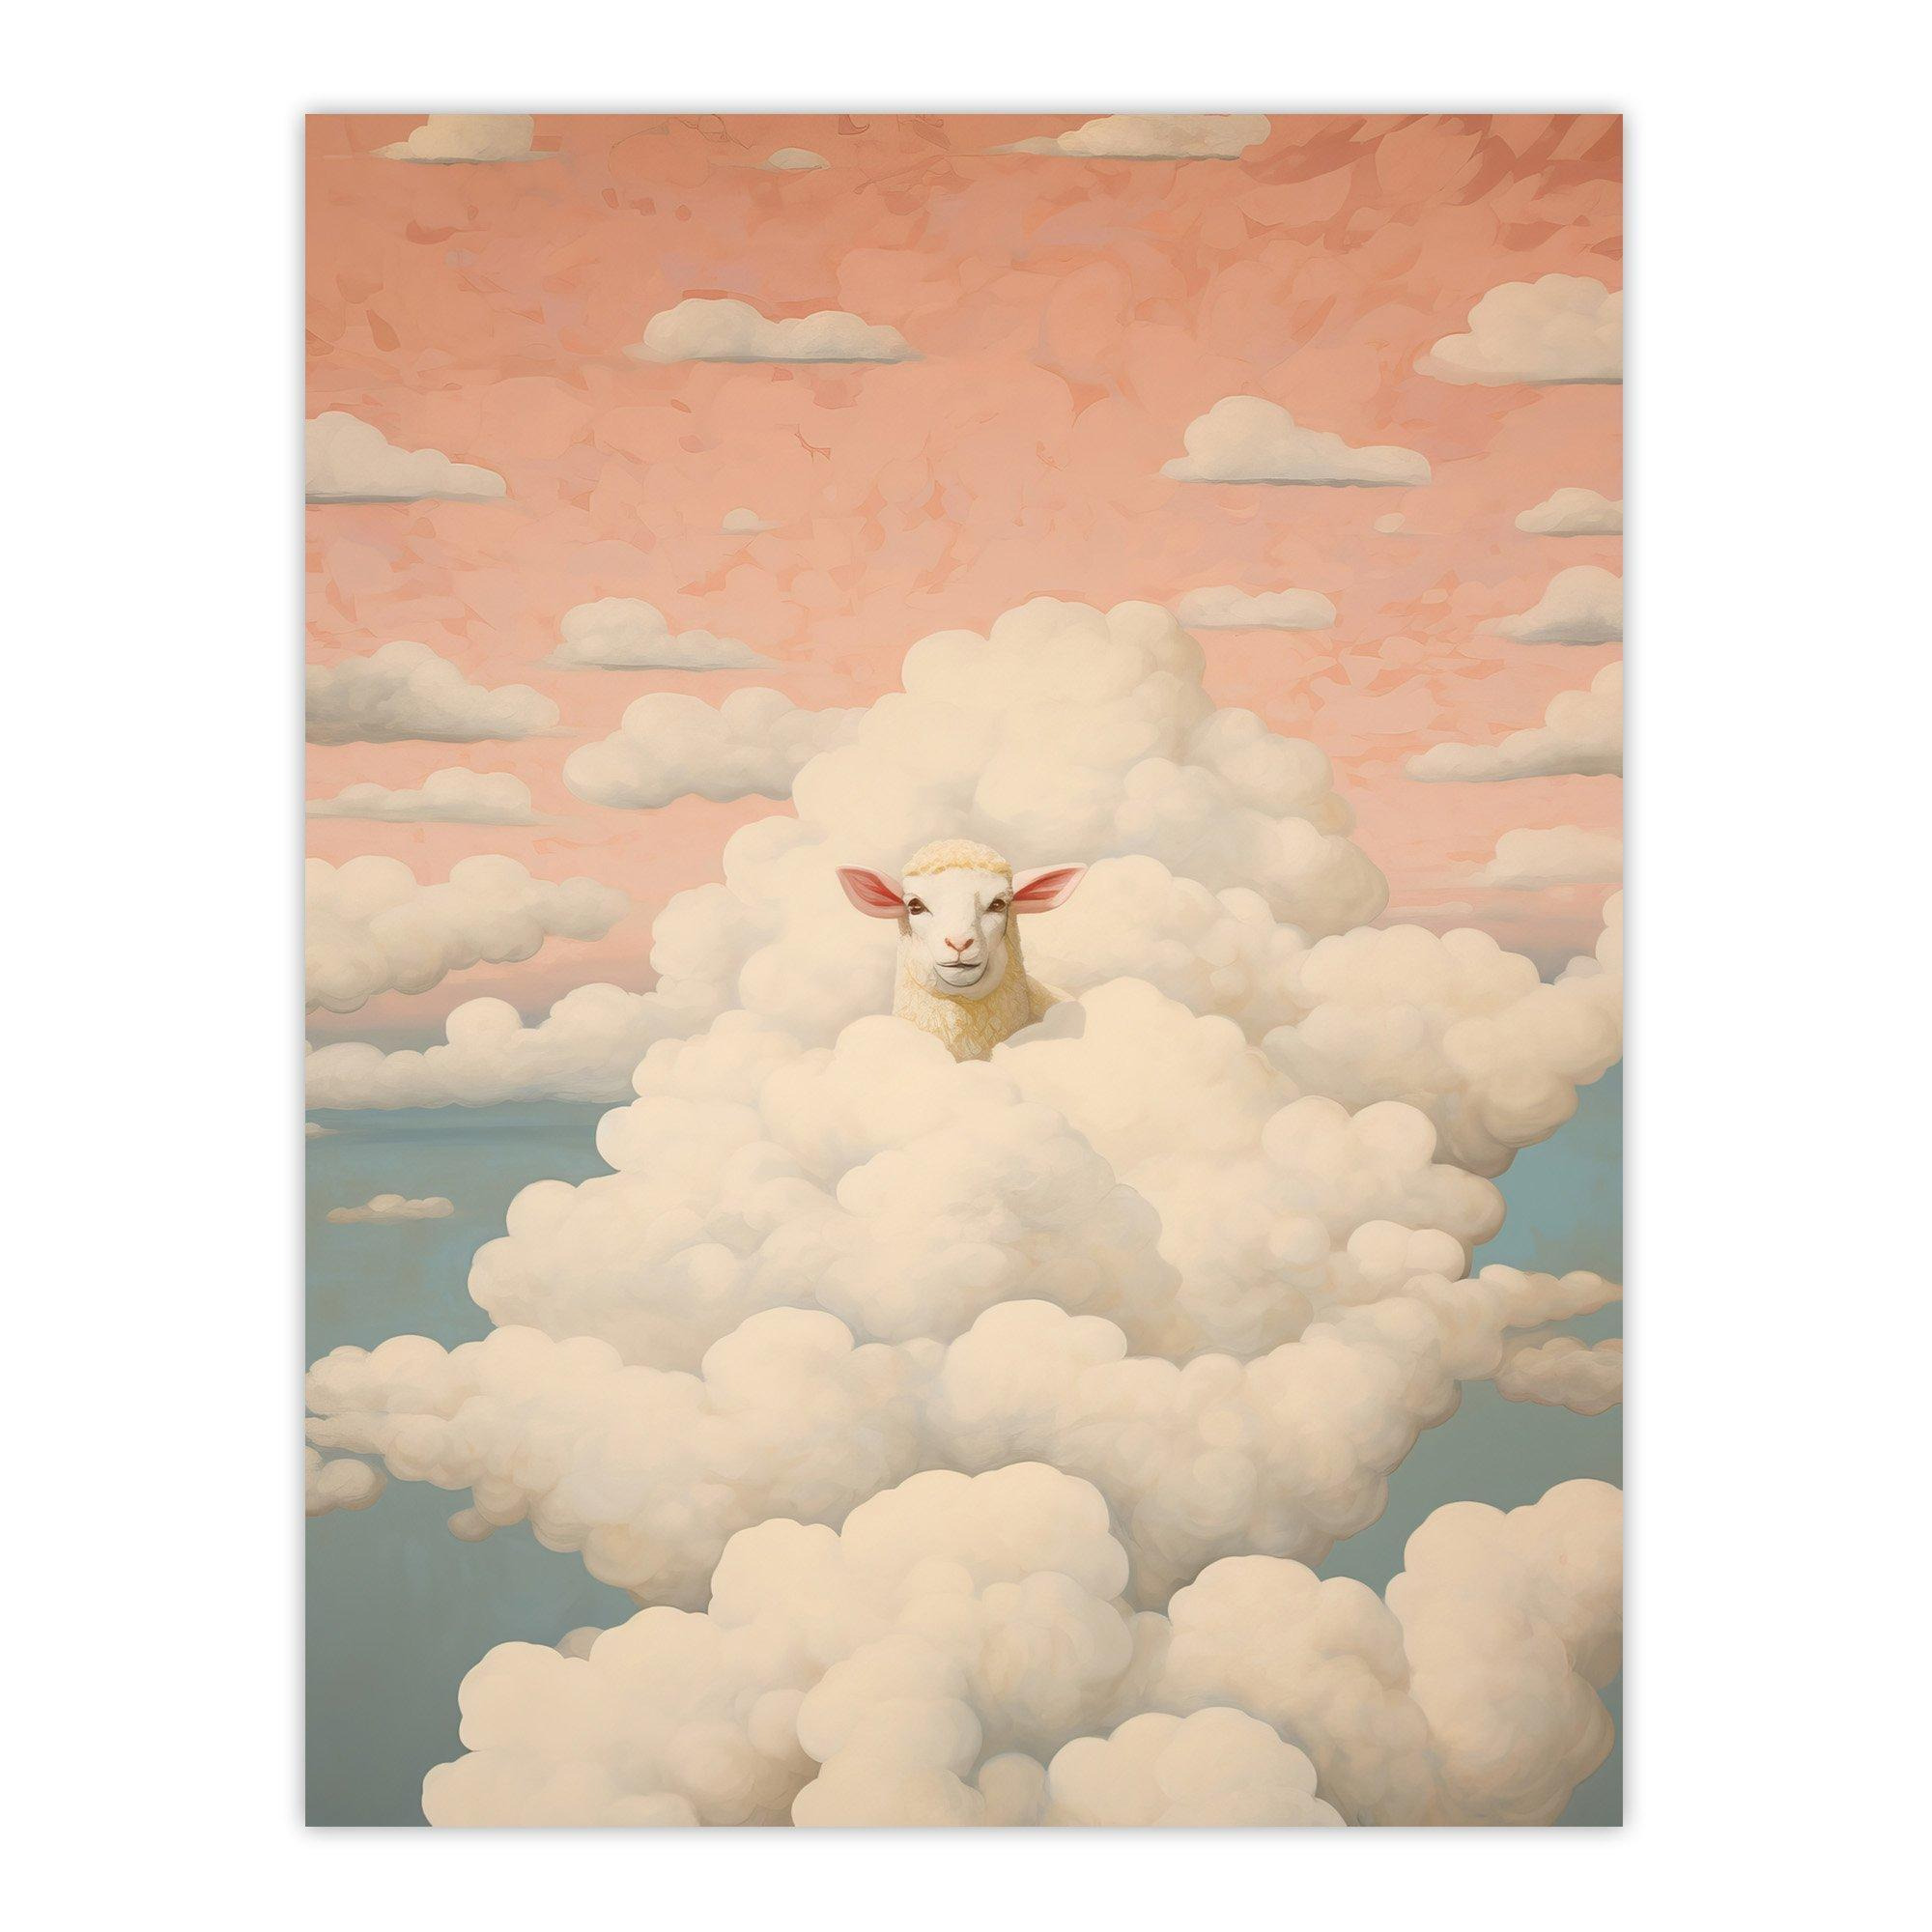 Head In The Clouds Sheep Fun Blue Pink Living Room Wall Art Print - image 1